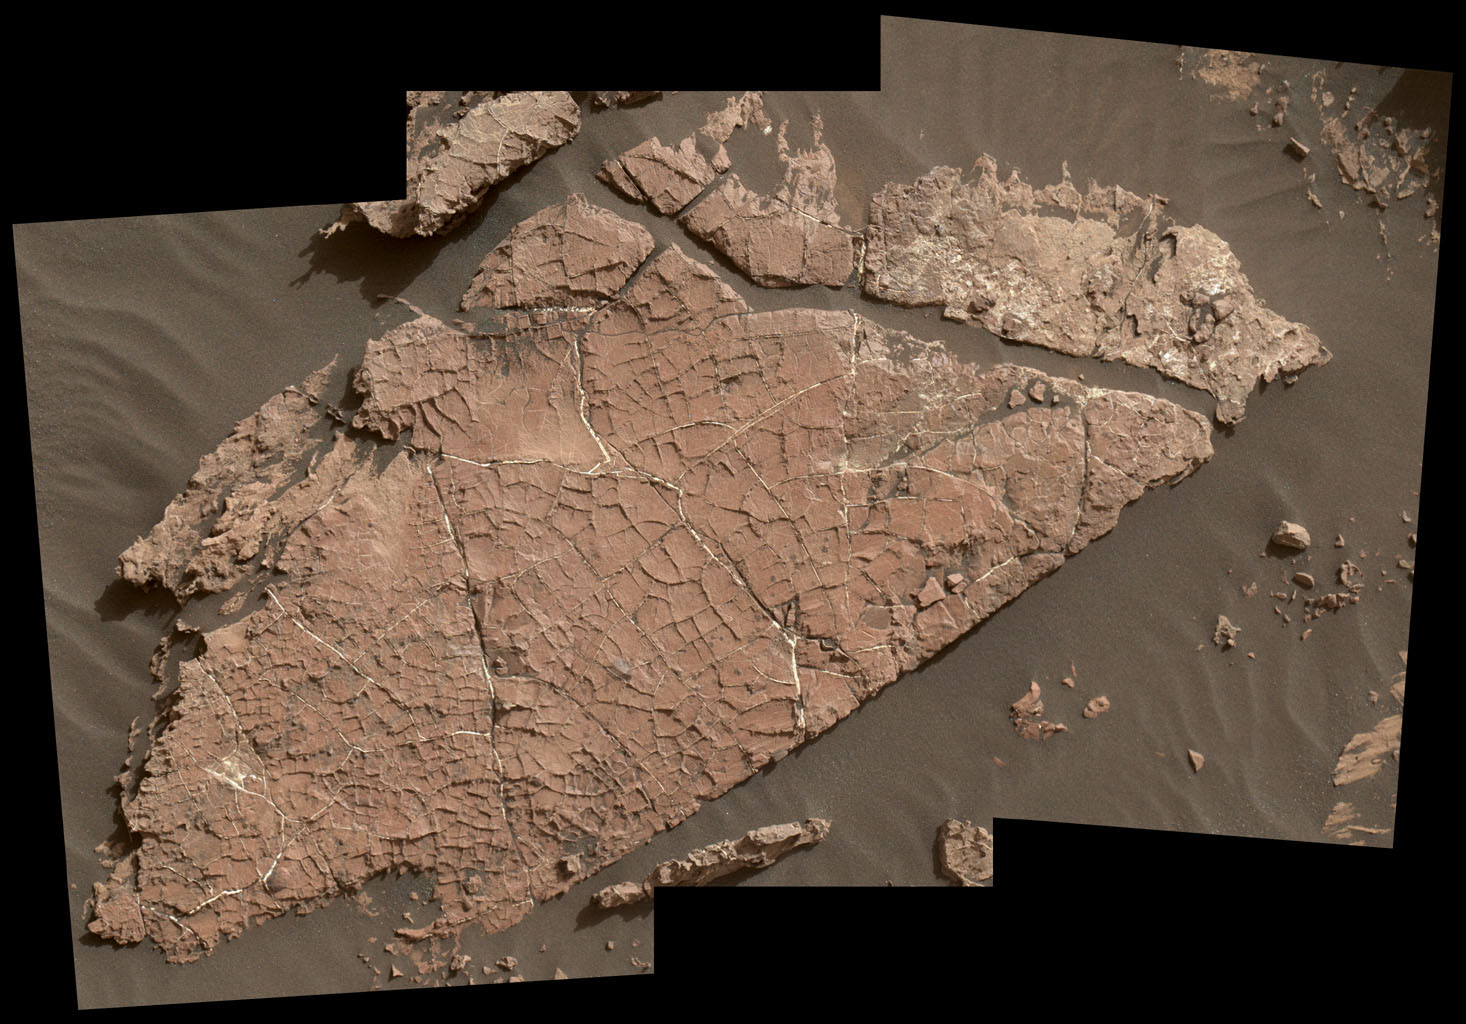 The network of cracks in this Martian rock slab called 'Old Soaker' may have formed from the drying of a mud layer more than 3 billion years ago. The view combines three images taken by NASA's Curiosity Mars rover on Dec. 31, 2016.